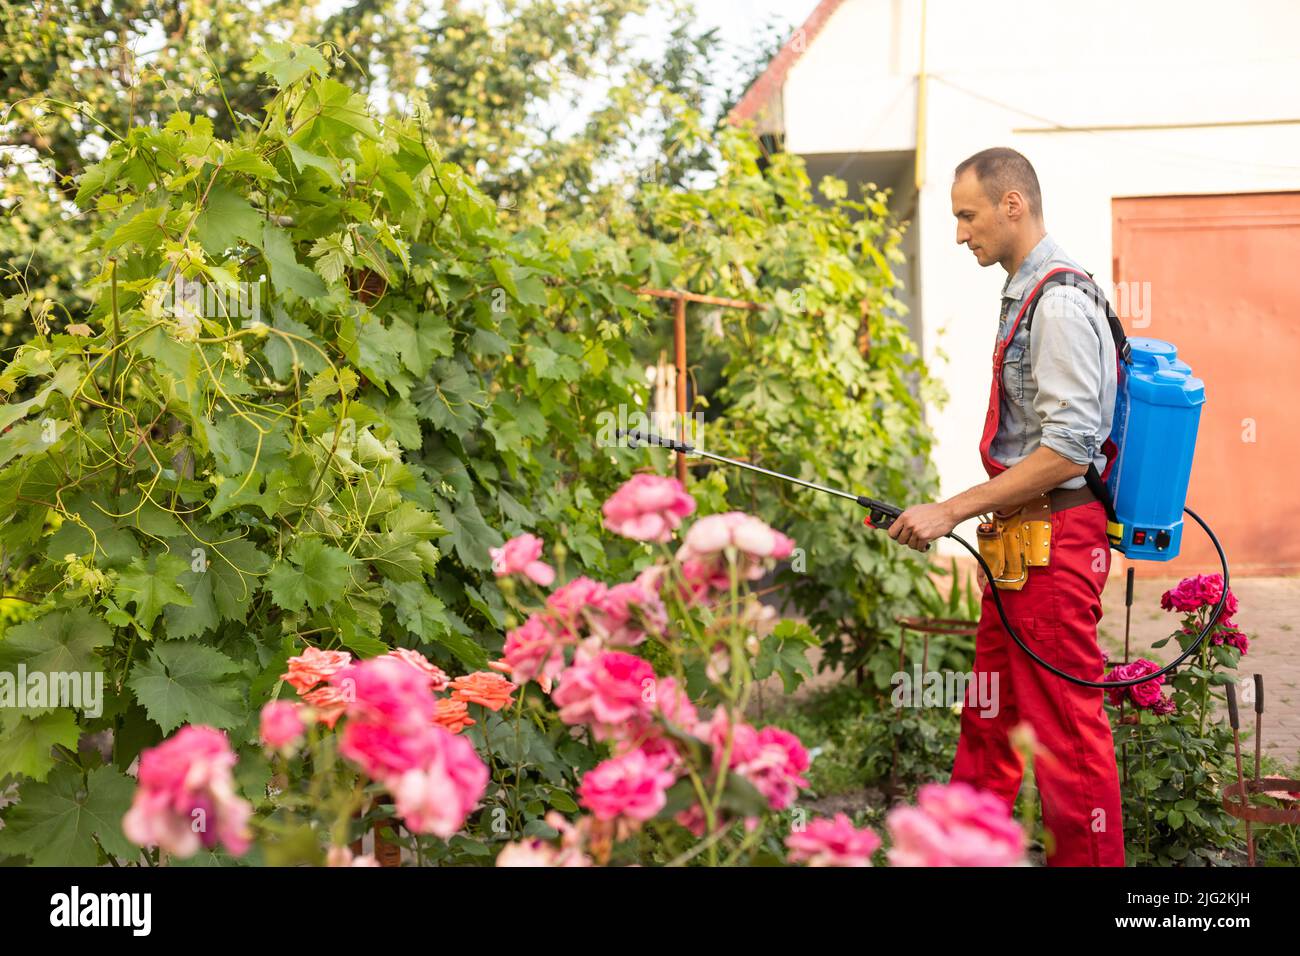 Treatment of affected rose plants with fungicides from a spray gun. Care of garden plants. Stock Photo